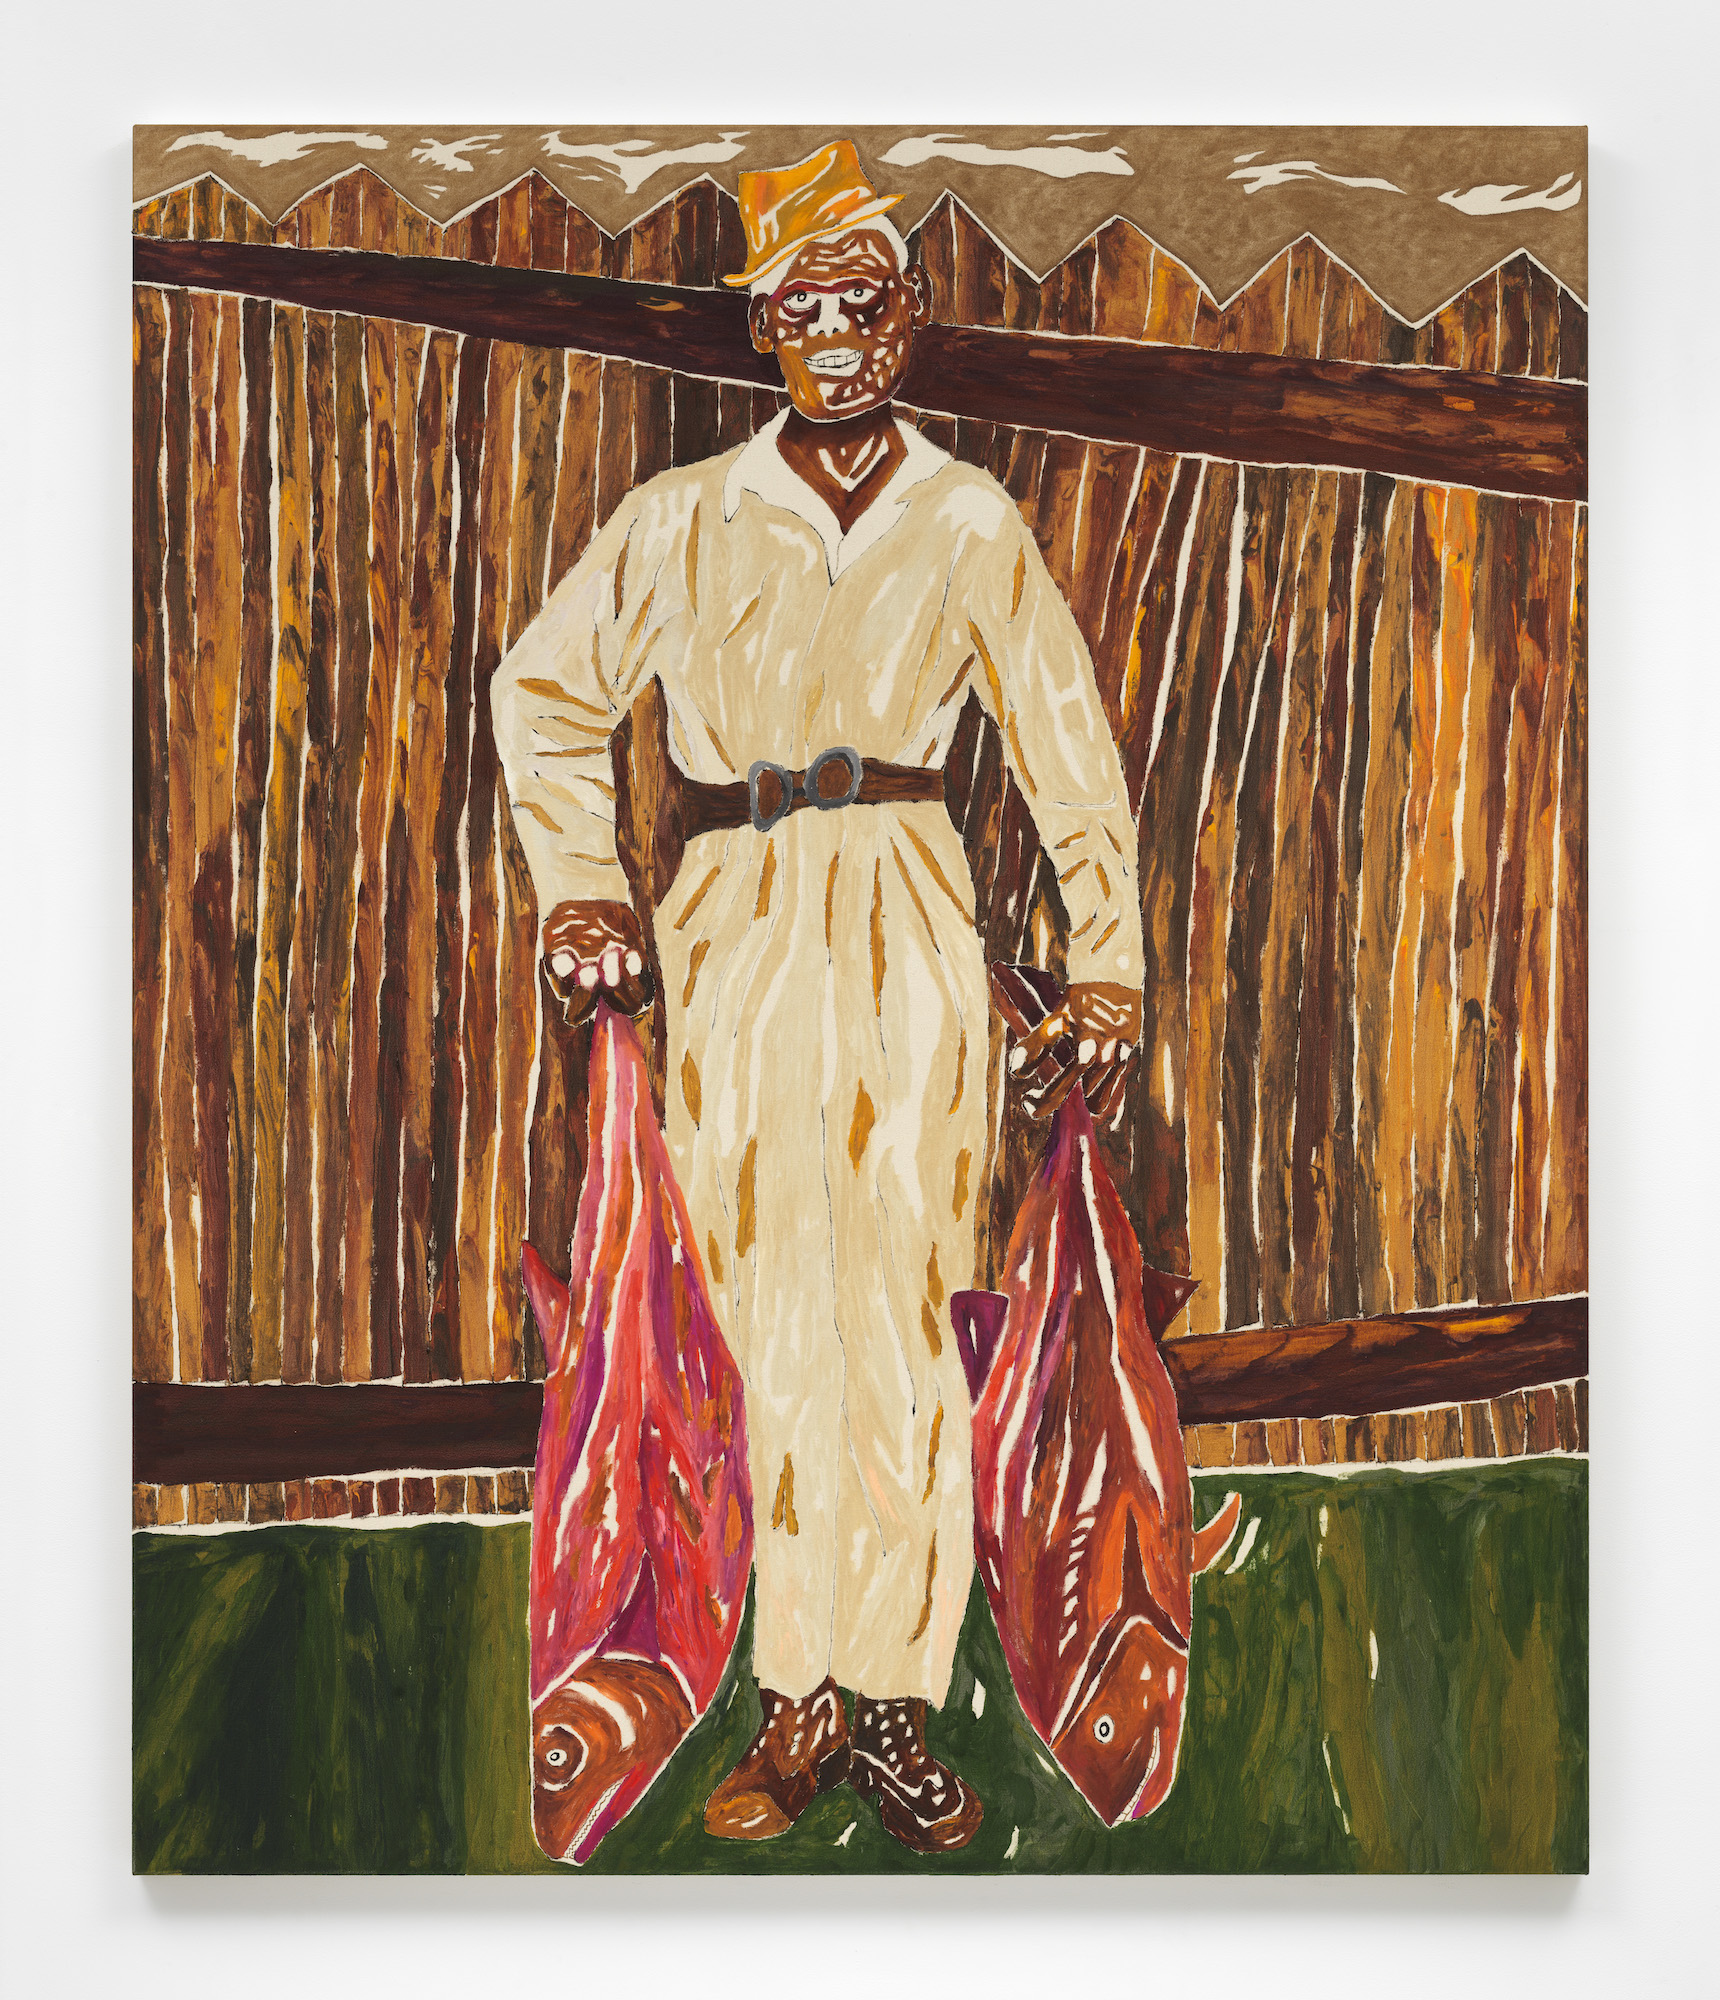 Image of a collage-like painting depicting a man in a long off-white tunic holding two large fish in each hand standing in front of a tall wooden fence.